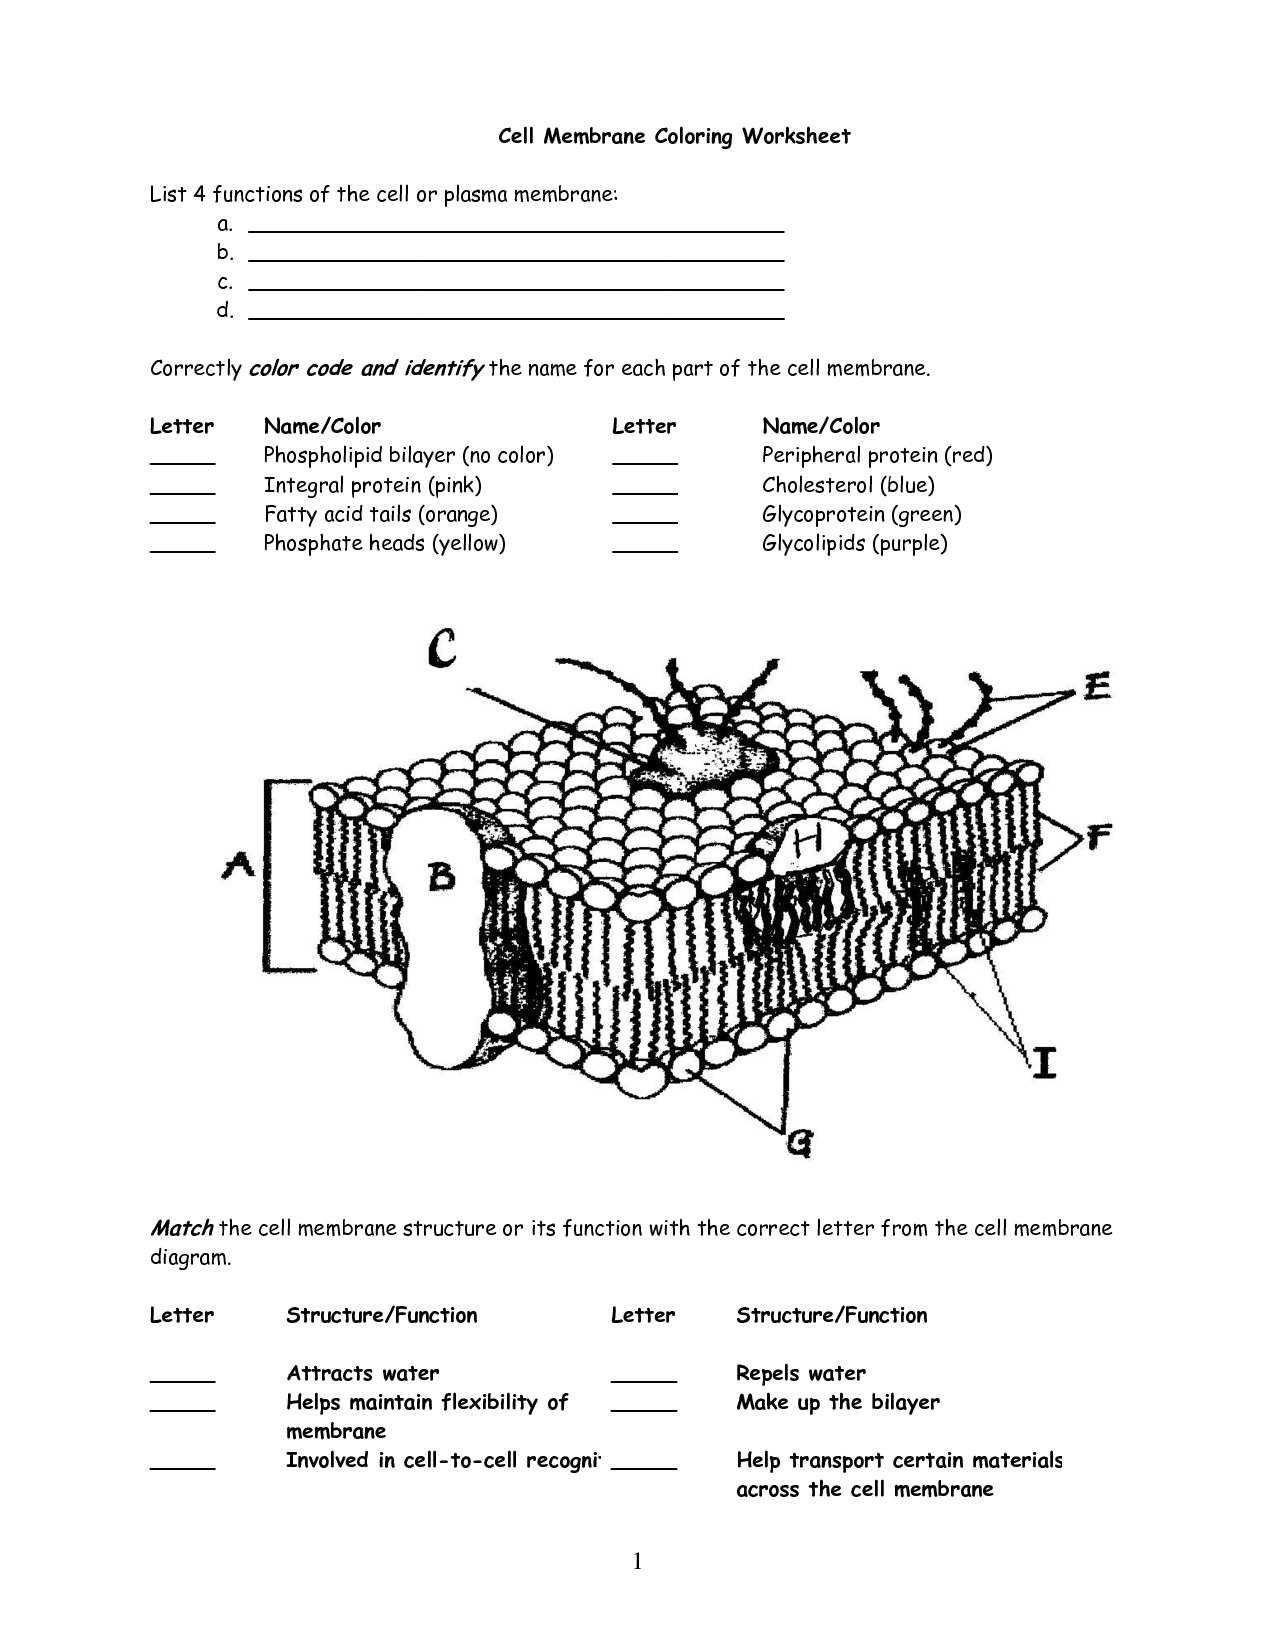 Cellular Structure and Function Worksheet and with Cell Membrane Coloring Worksheet Coloring Pages Answers